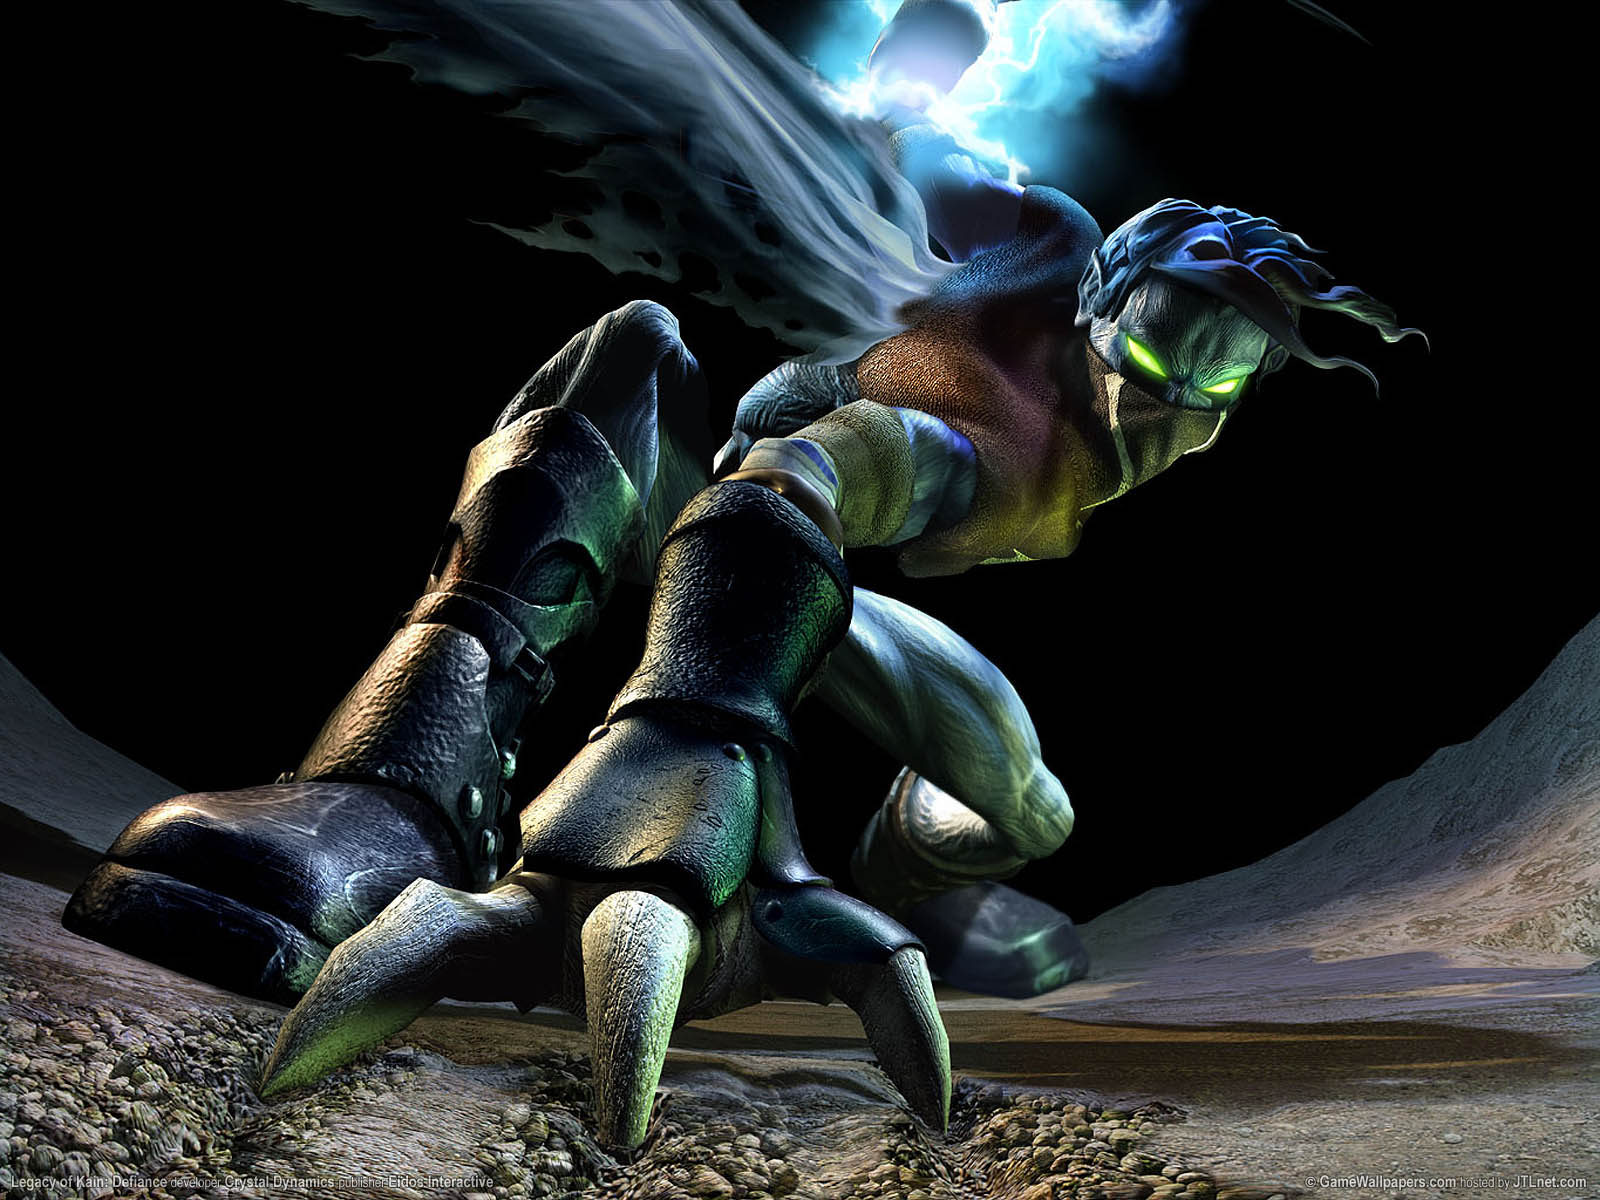 Legacy of Kain%253A Defiance wallpaper 03 1600x1200